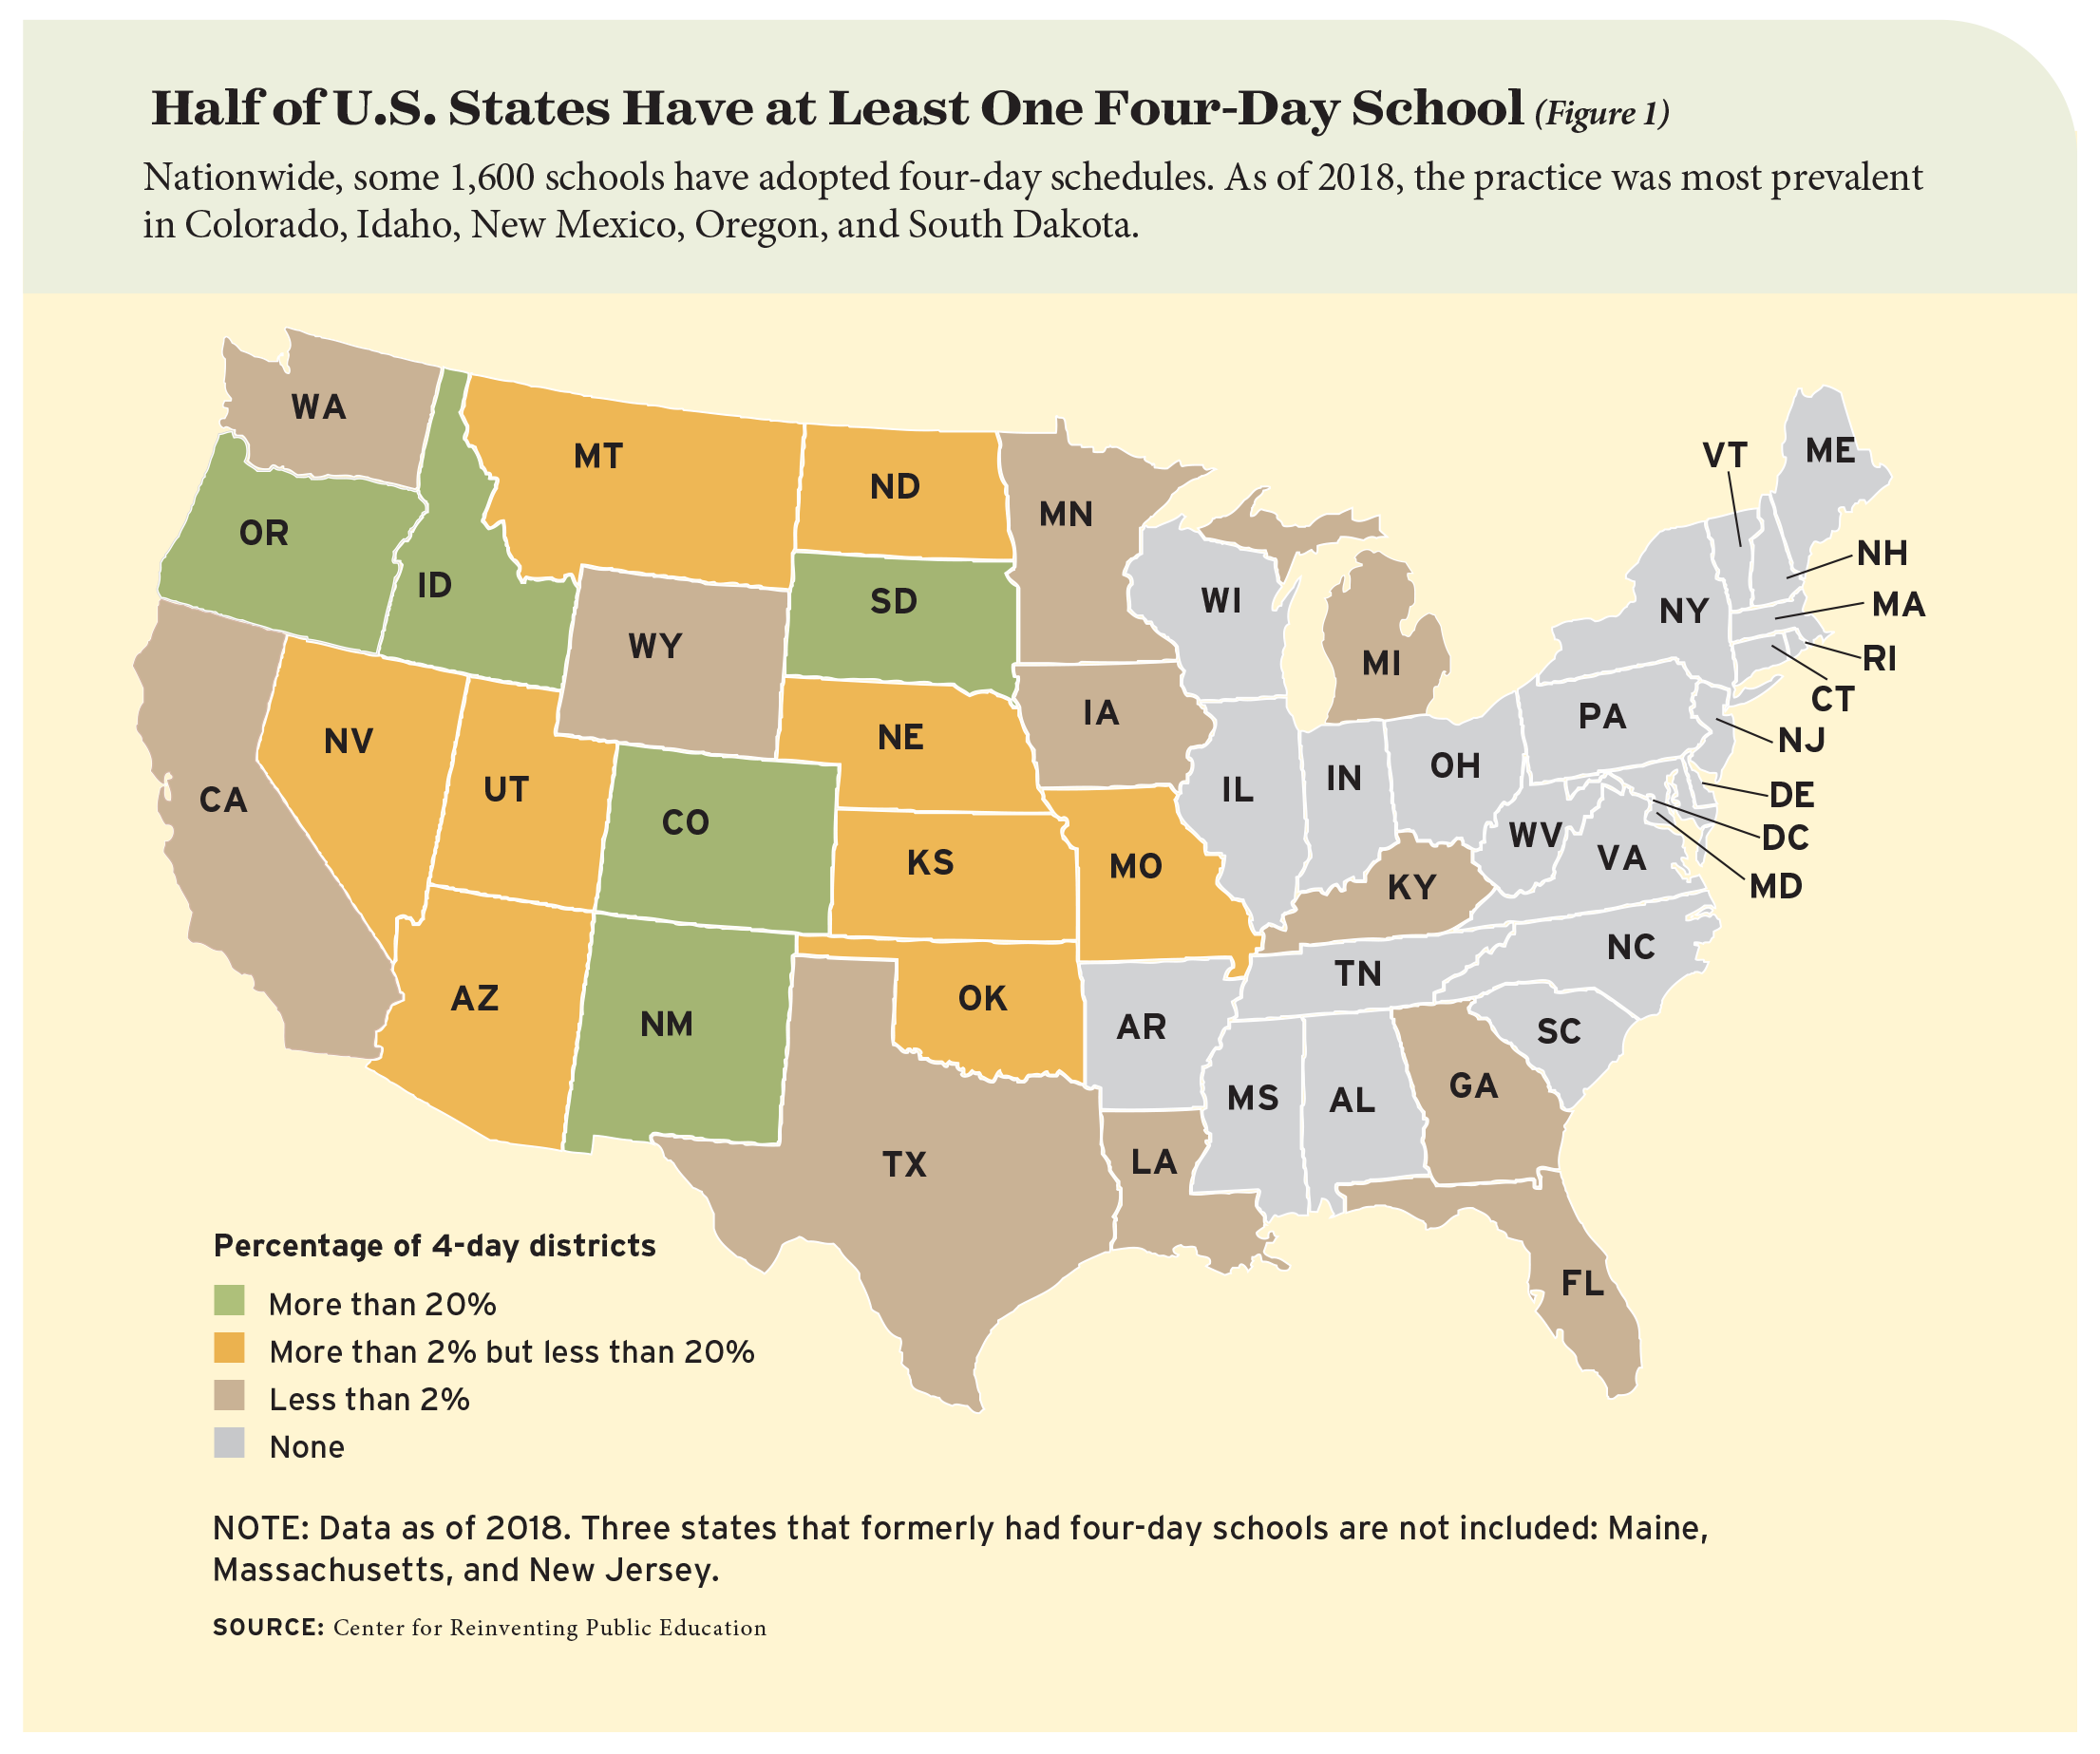 Figure 1: Half of U.S. States Have at Least One Four-Day School